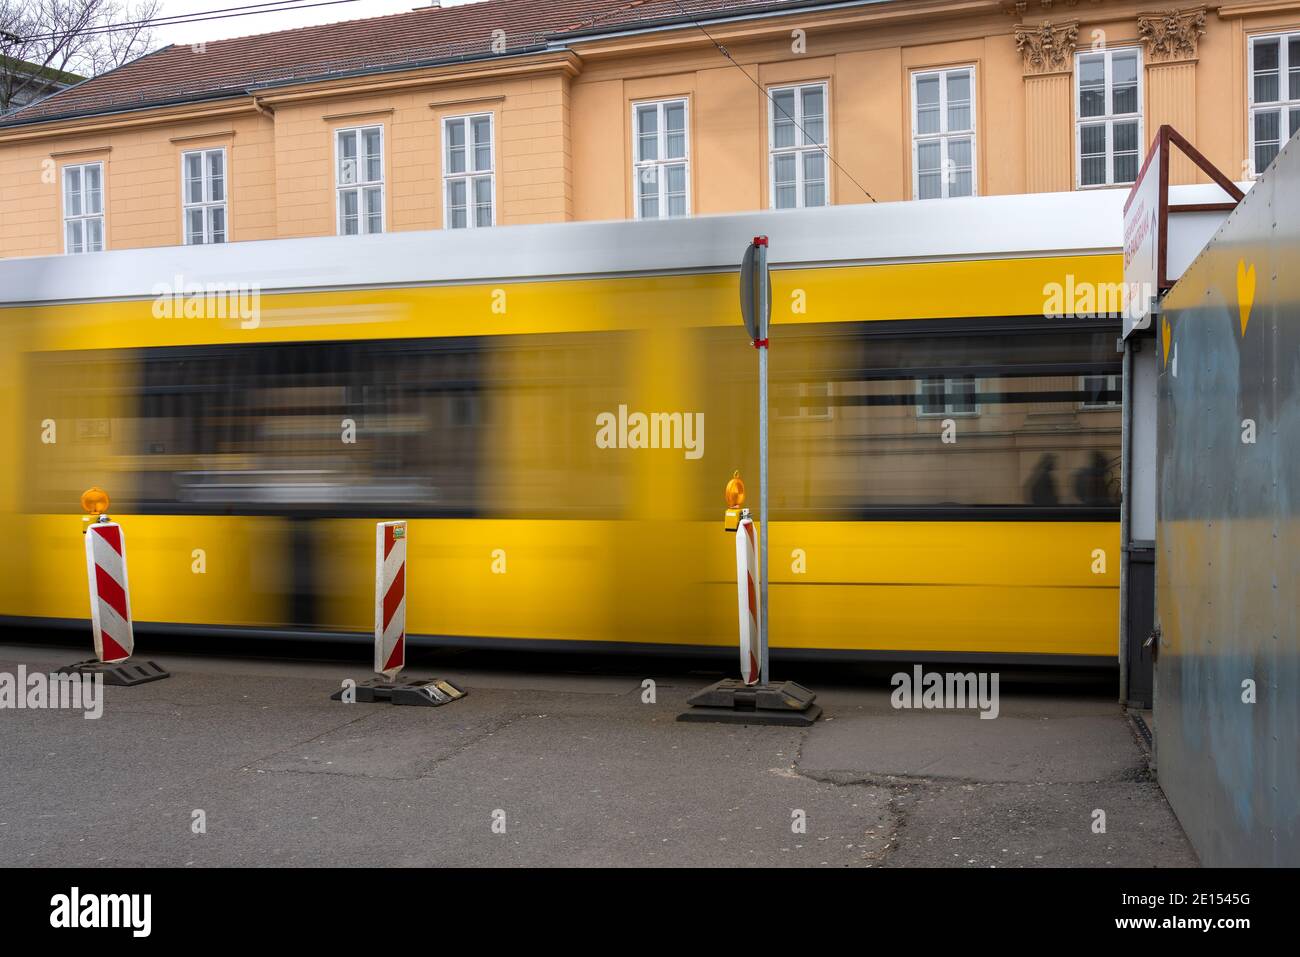 Tram At A Construction Site In Berlin Stock Photo